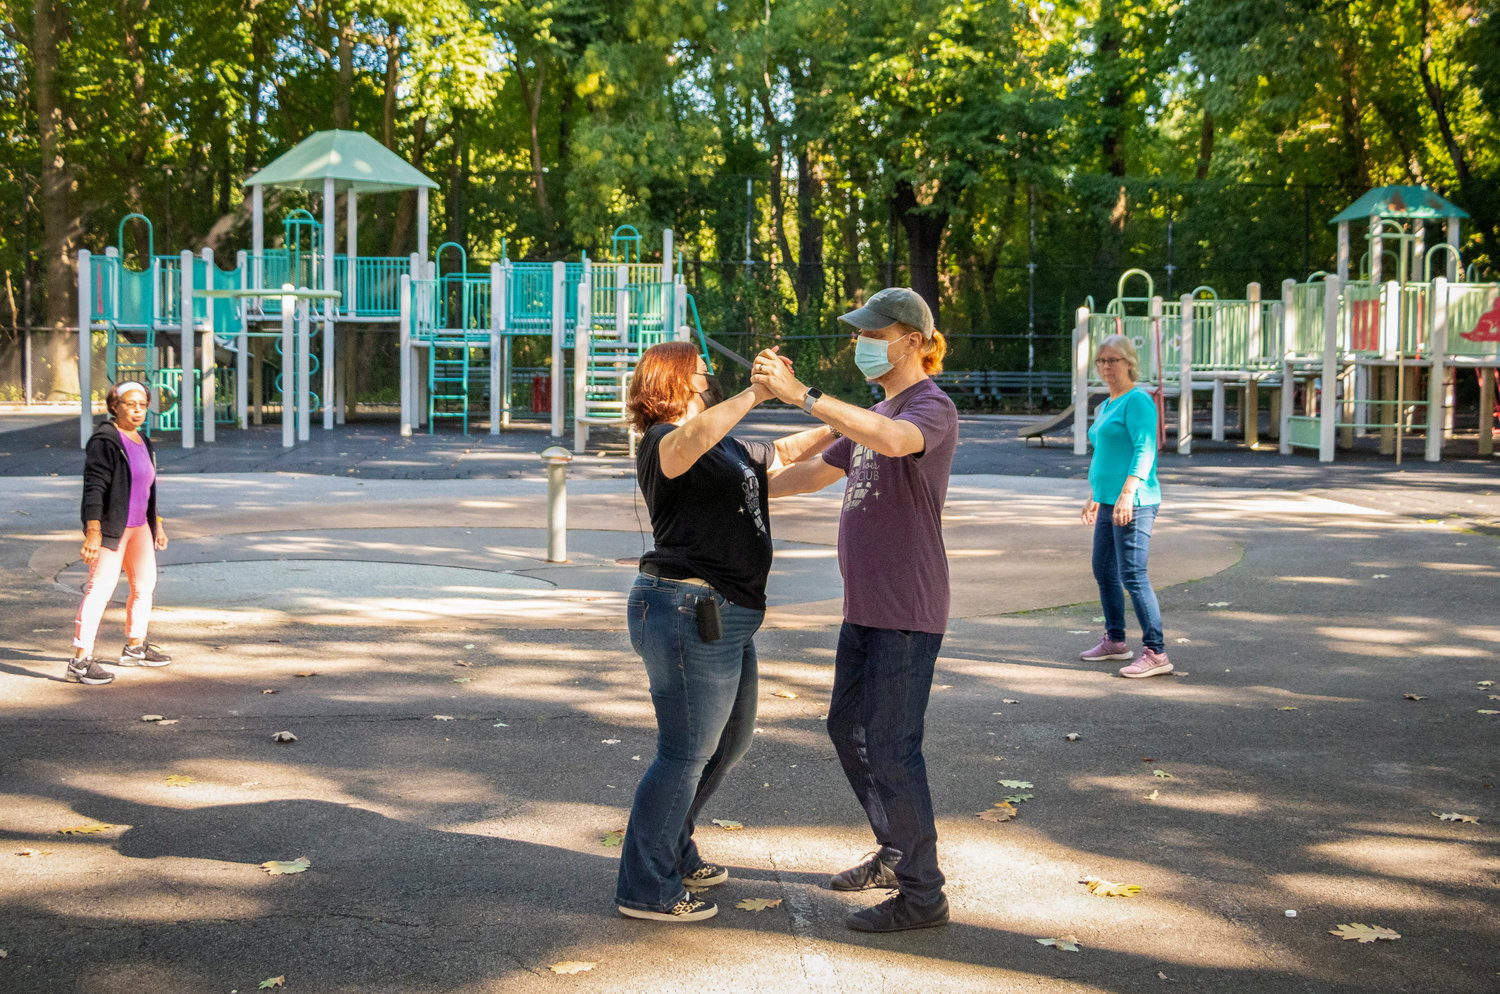 During a Silver Shoes Dance Club class in Van Cortlandt Park’s Classic Playground, Daniela Del Giorno demonstrates ballroom dancing. Silver Shoes is a free dance program for adults over 55 with the mission of keeping senior citizens physically and mentally active.